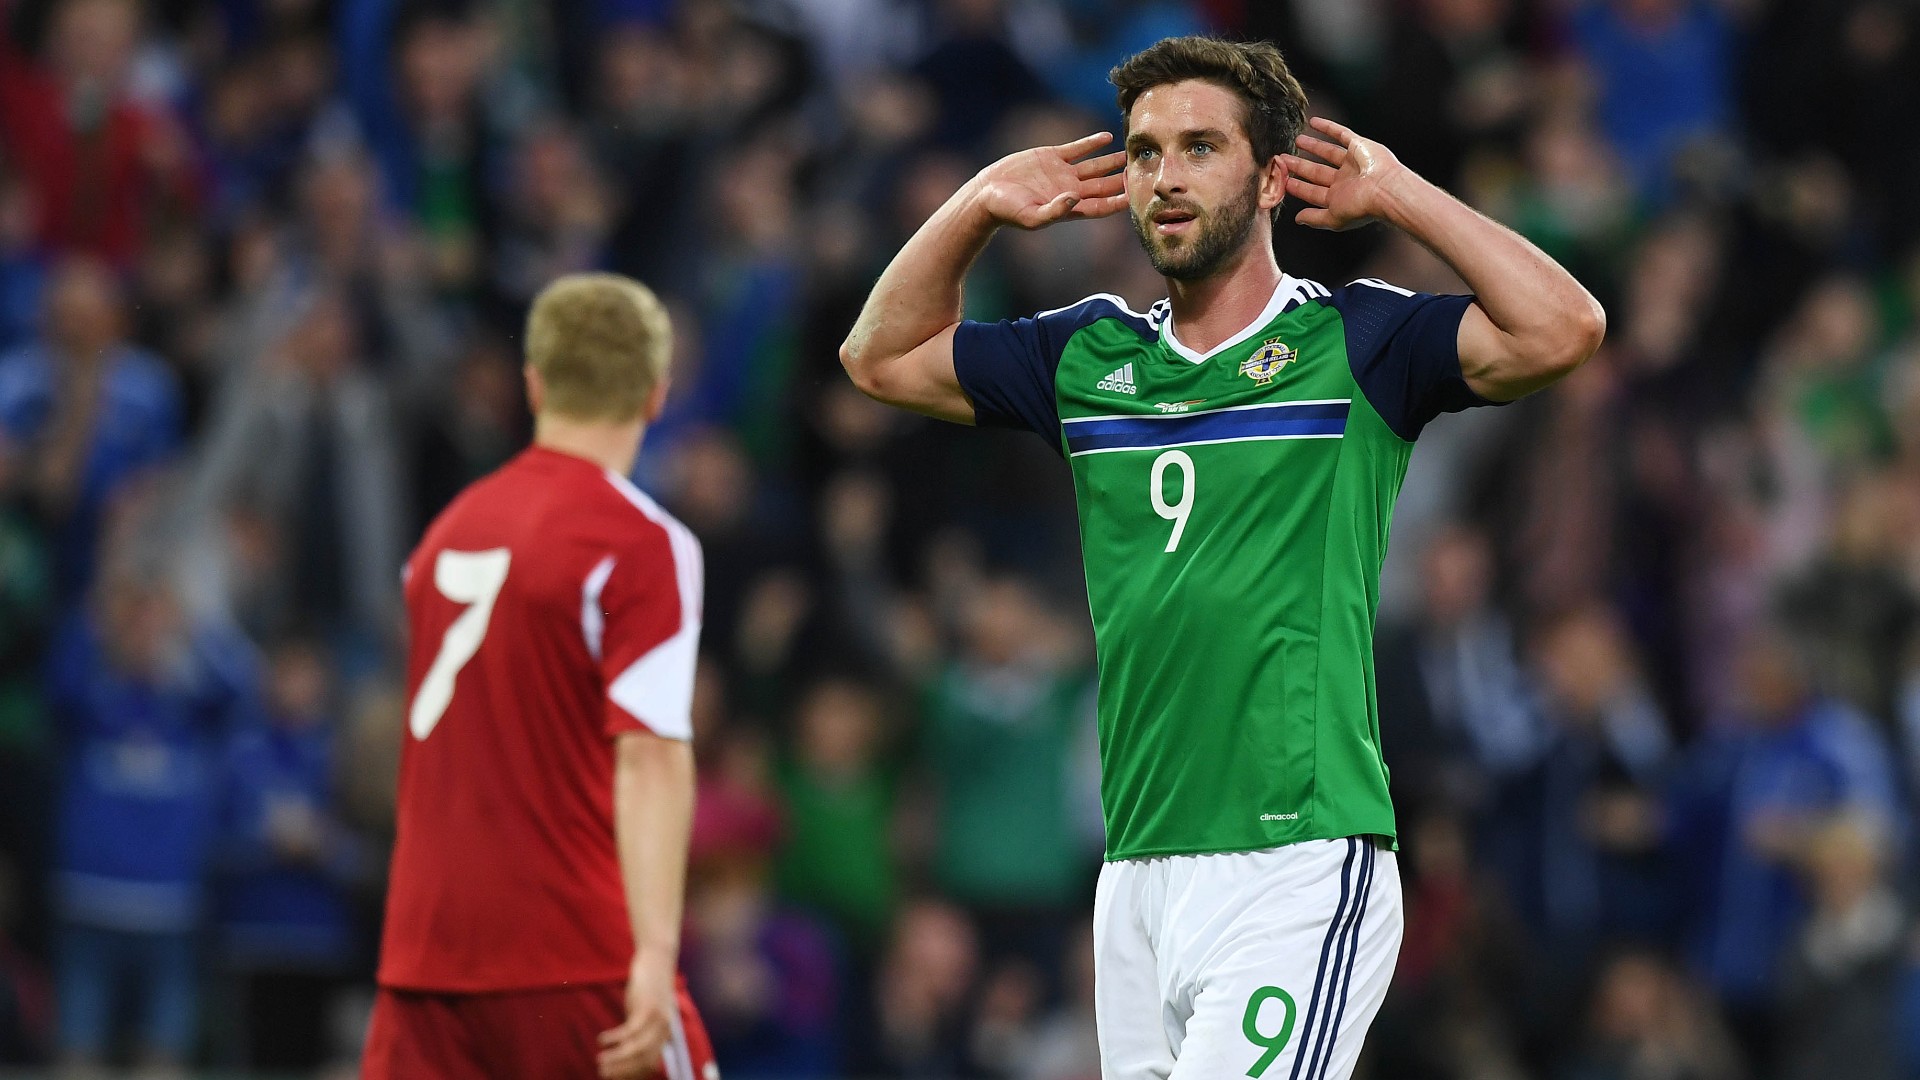 'The song exists because I scored 25 goals!' - Grigg reveals frustration at Euro 2016 cult song